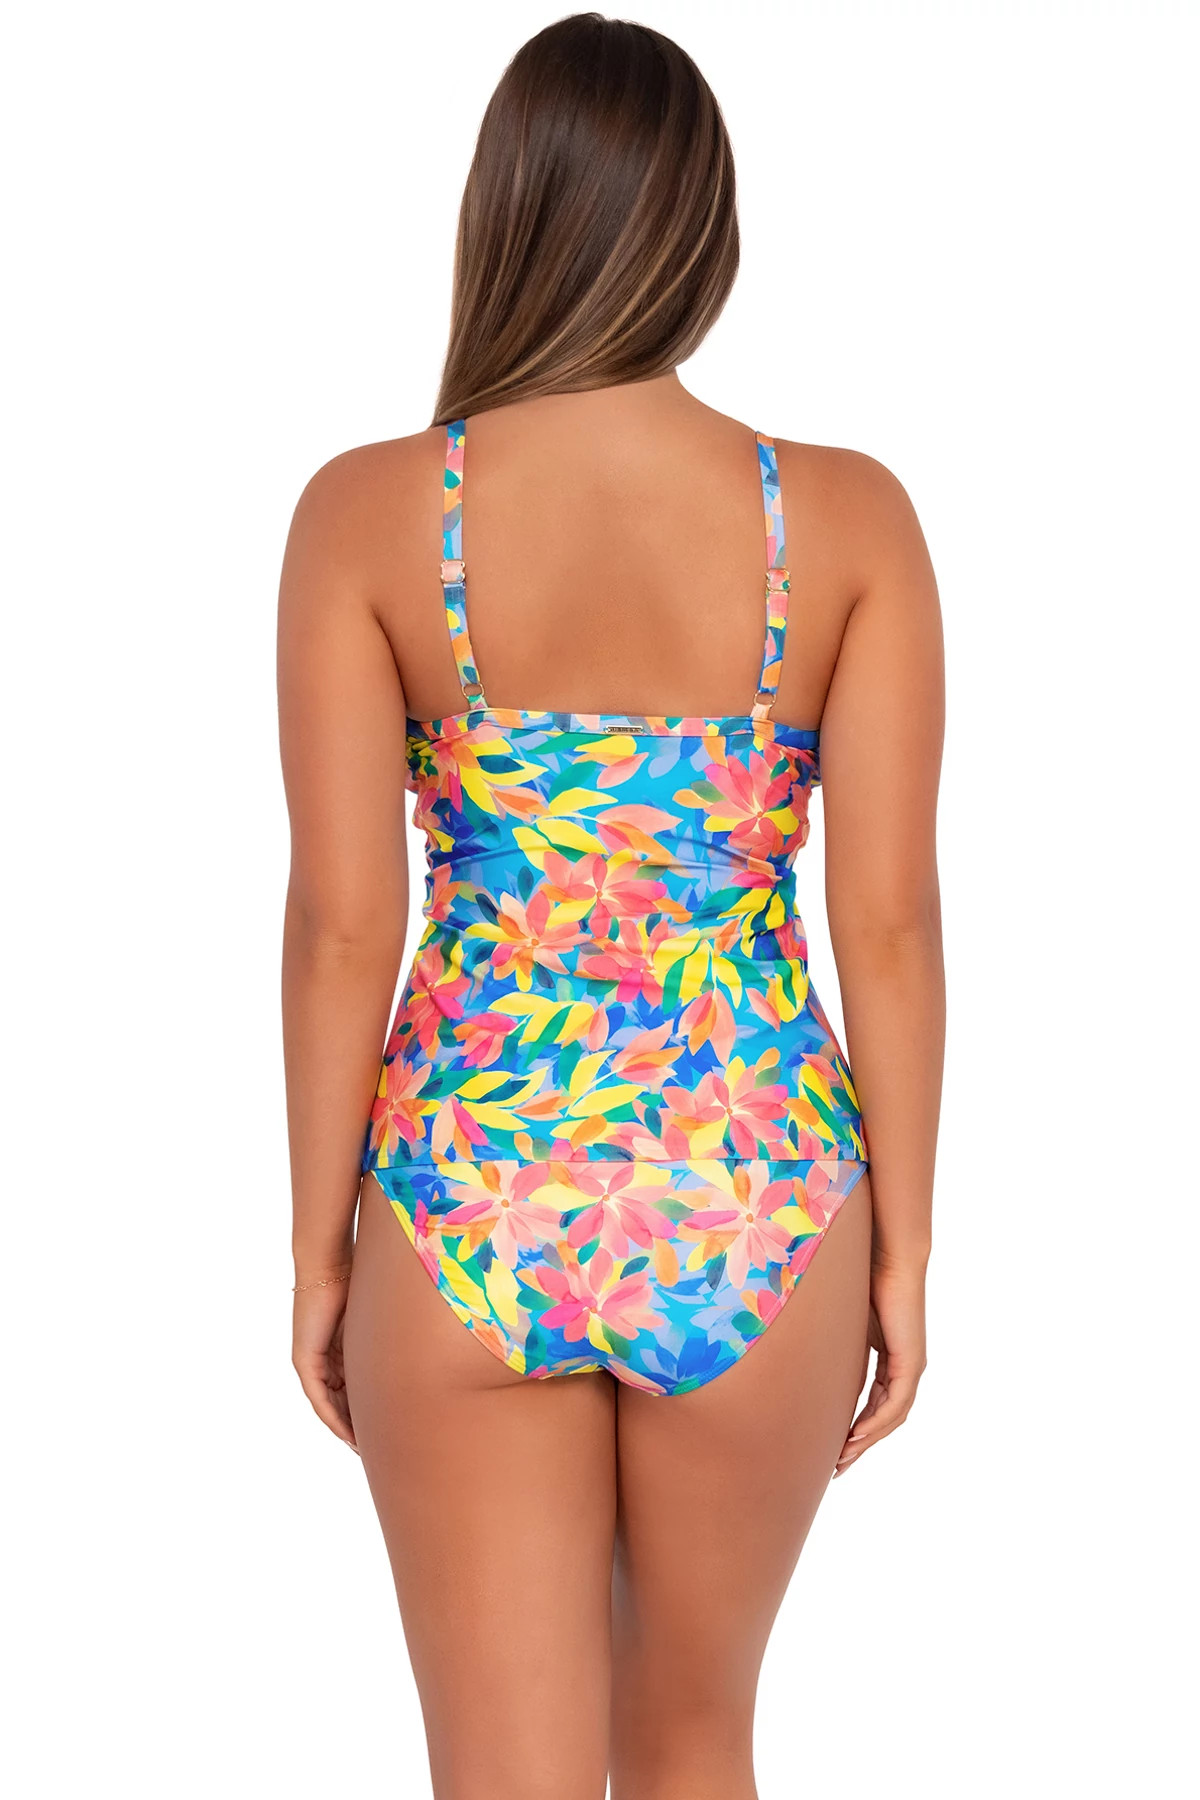 SHORELINE PETALS Forever Underwire Tankini Top (E-H Cup) image number 2